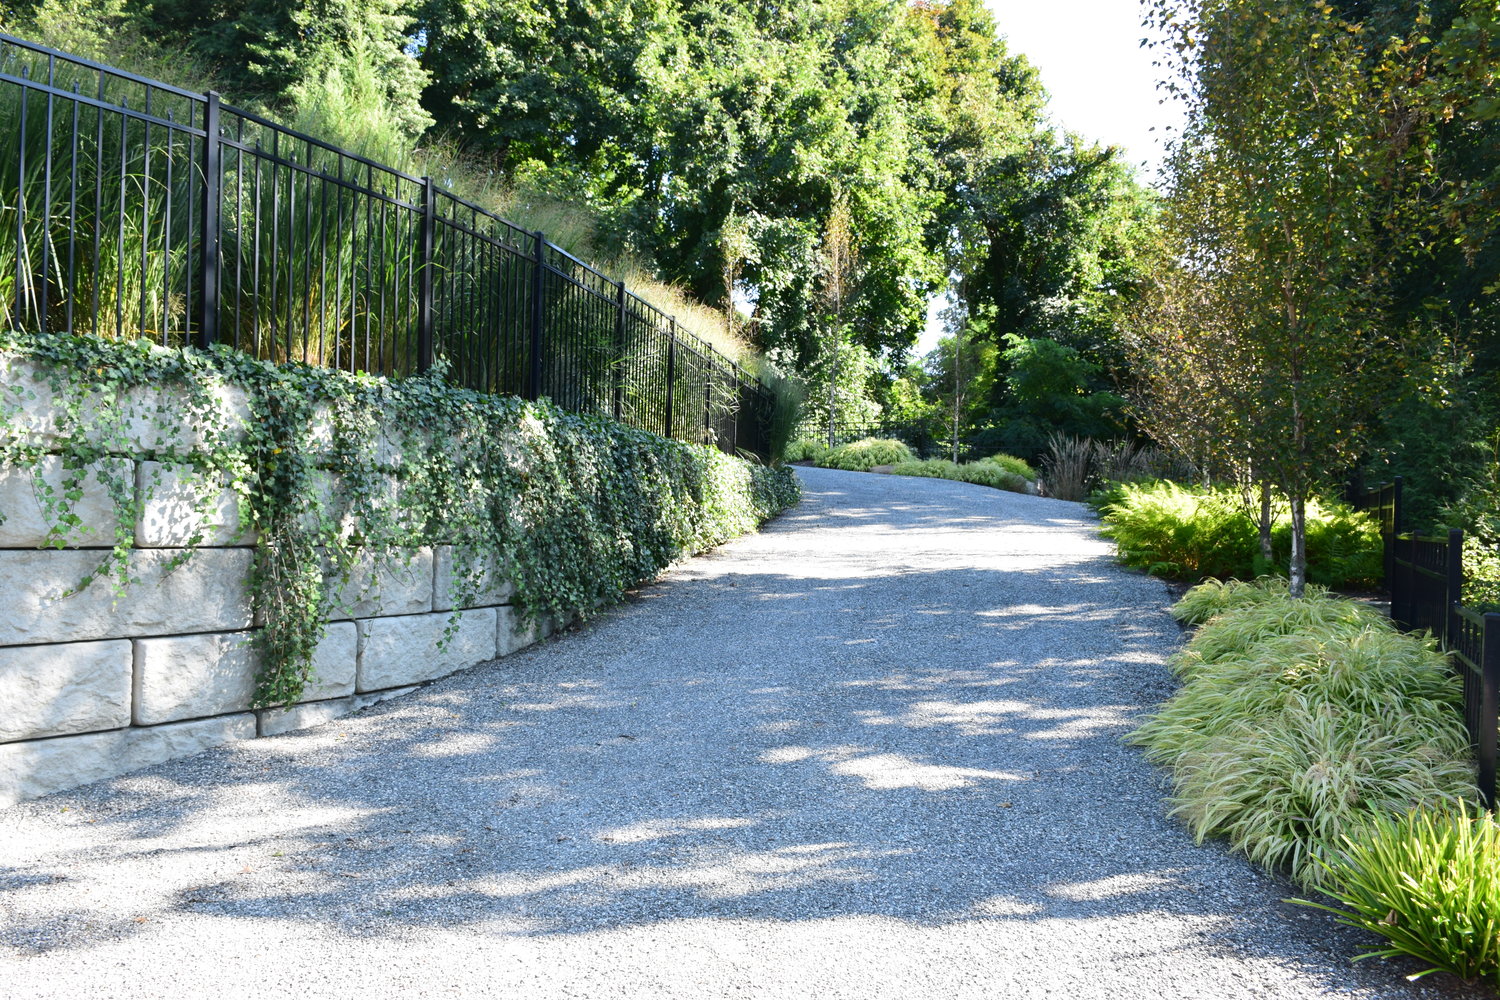 Here, the driveway uses ivy to both hide and add beauty to constructed retaining walls, and vibrant plantings line both sides of the entry to the home. Behind the iron fence is the pool area, with tall grasses creating privacy with a natural, carefree feel.